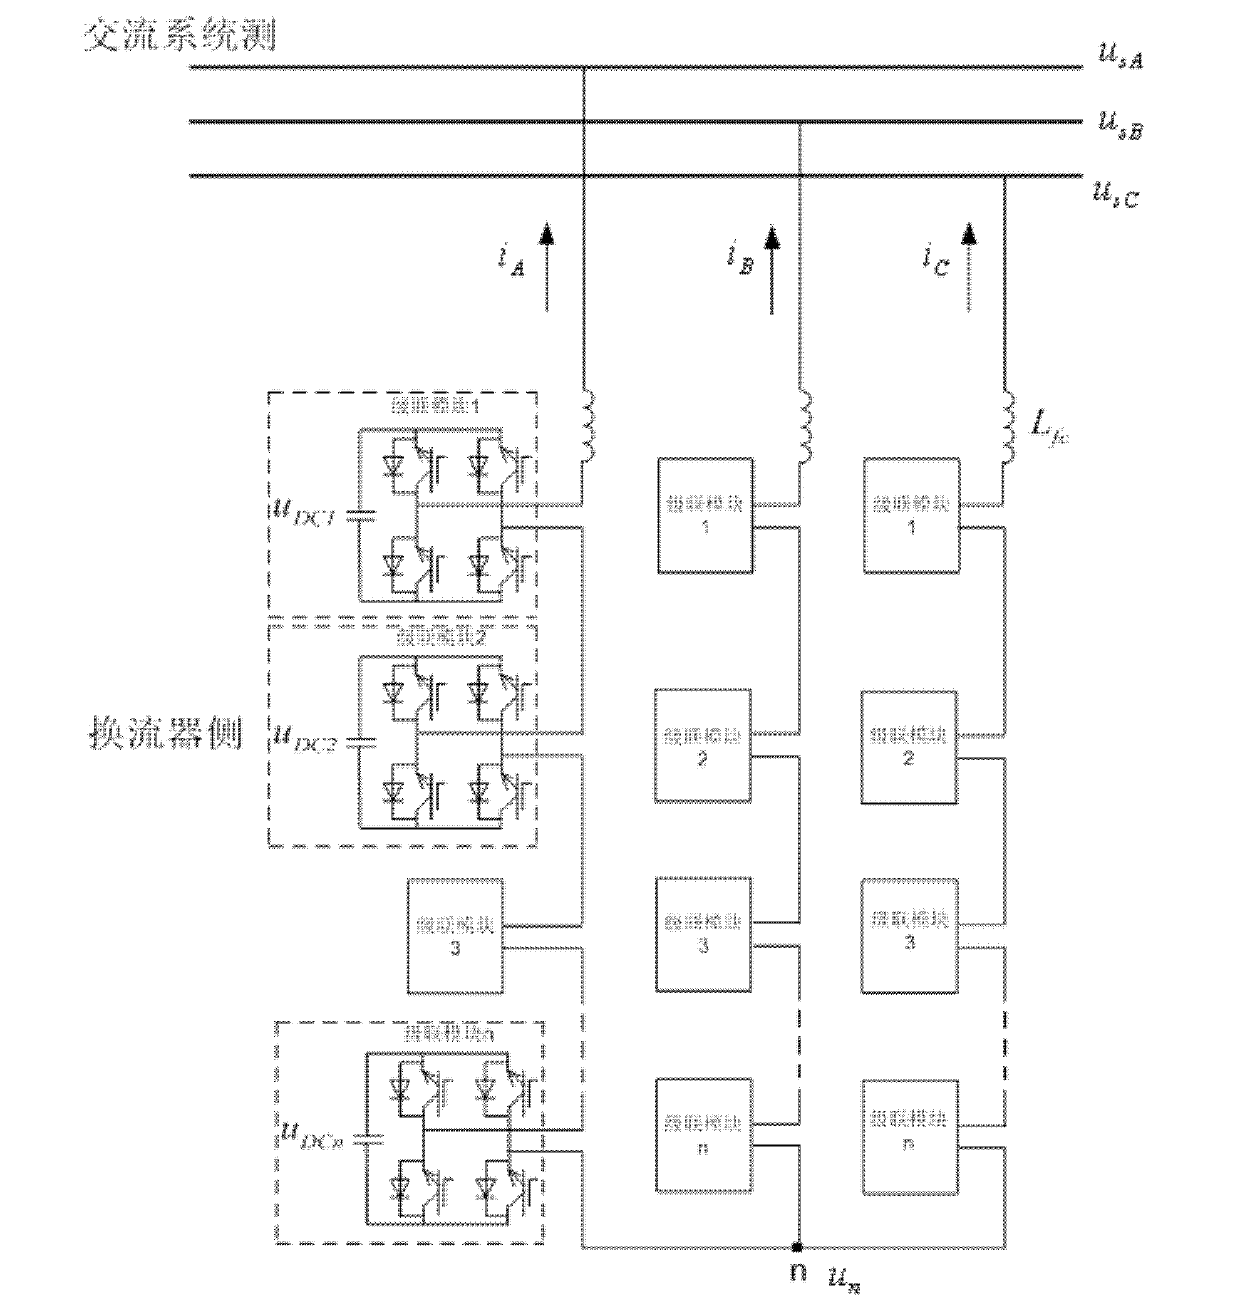 Negative-sequence-current-based control method of conversion chain average direct voltage